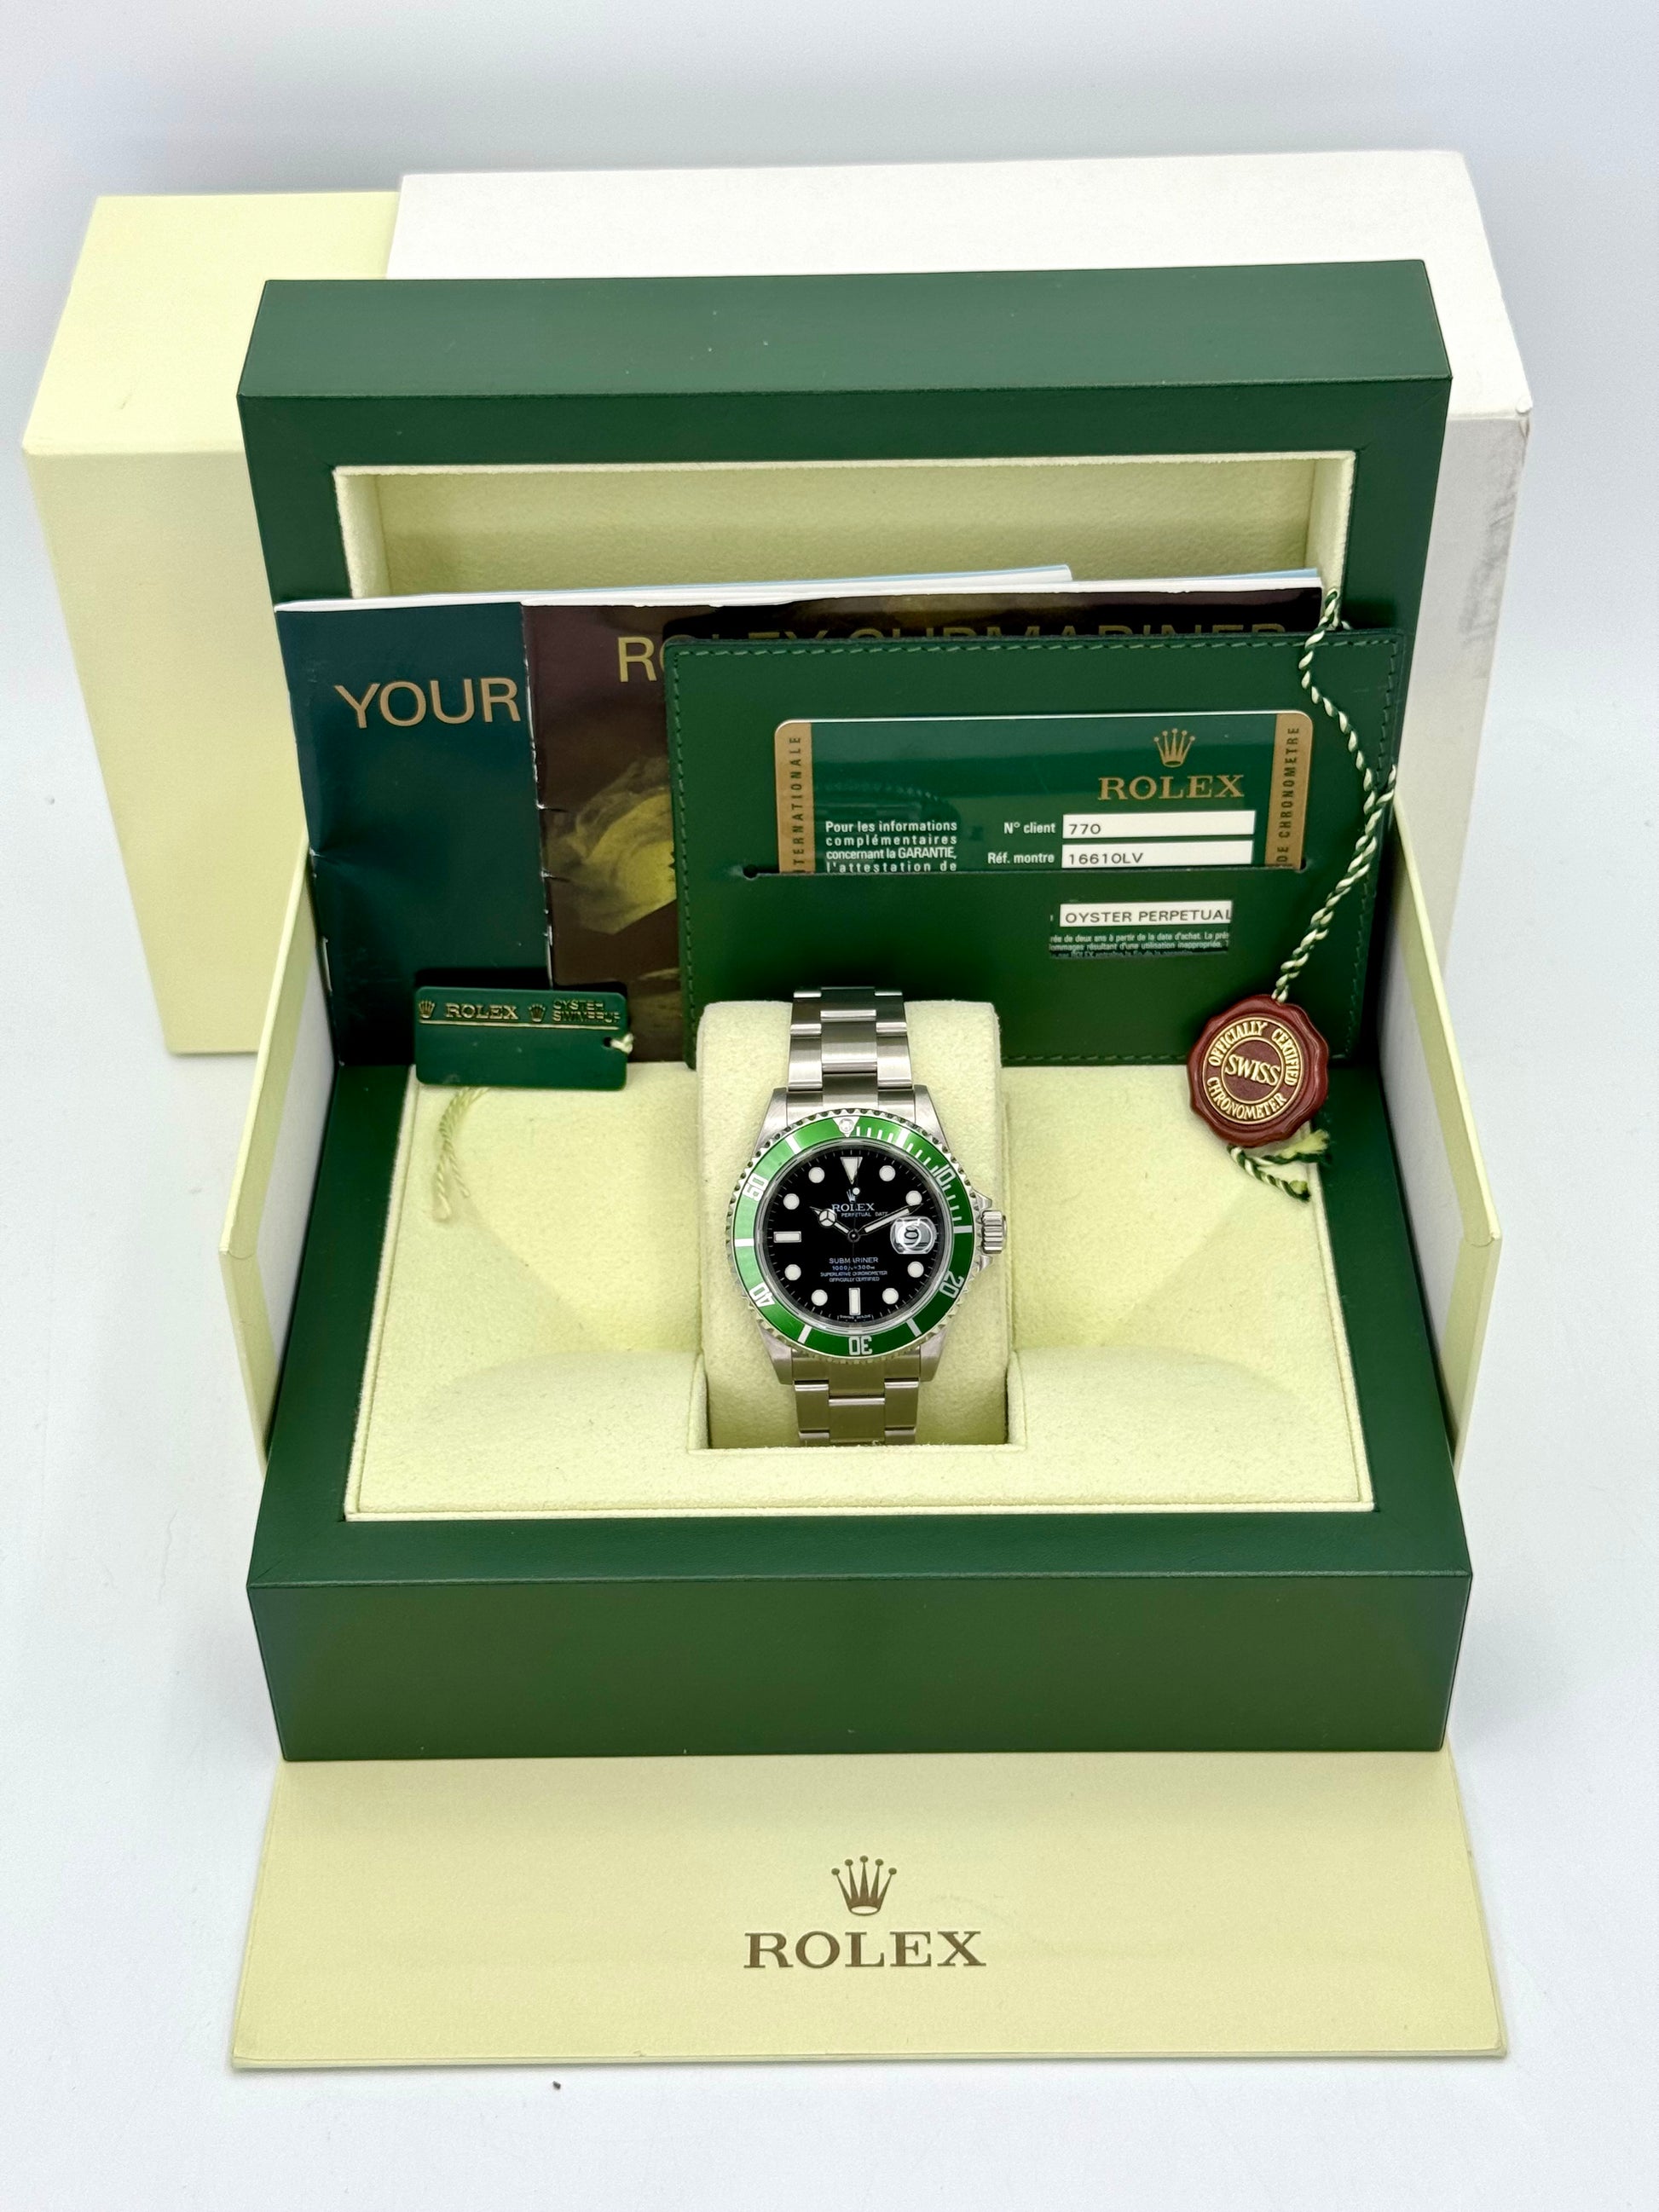 2009 Rolex Submariner "Kermit" 40mm 16610LV Stainless Steel Black Dial - MyWatchLLC